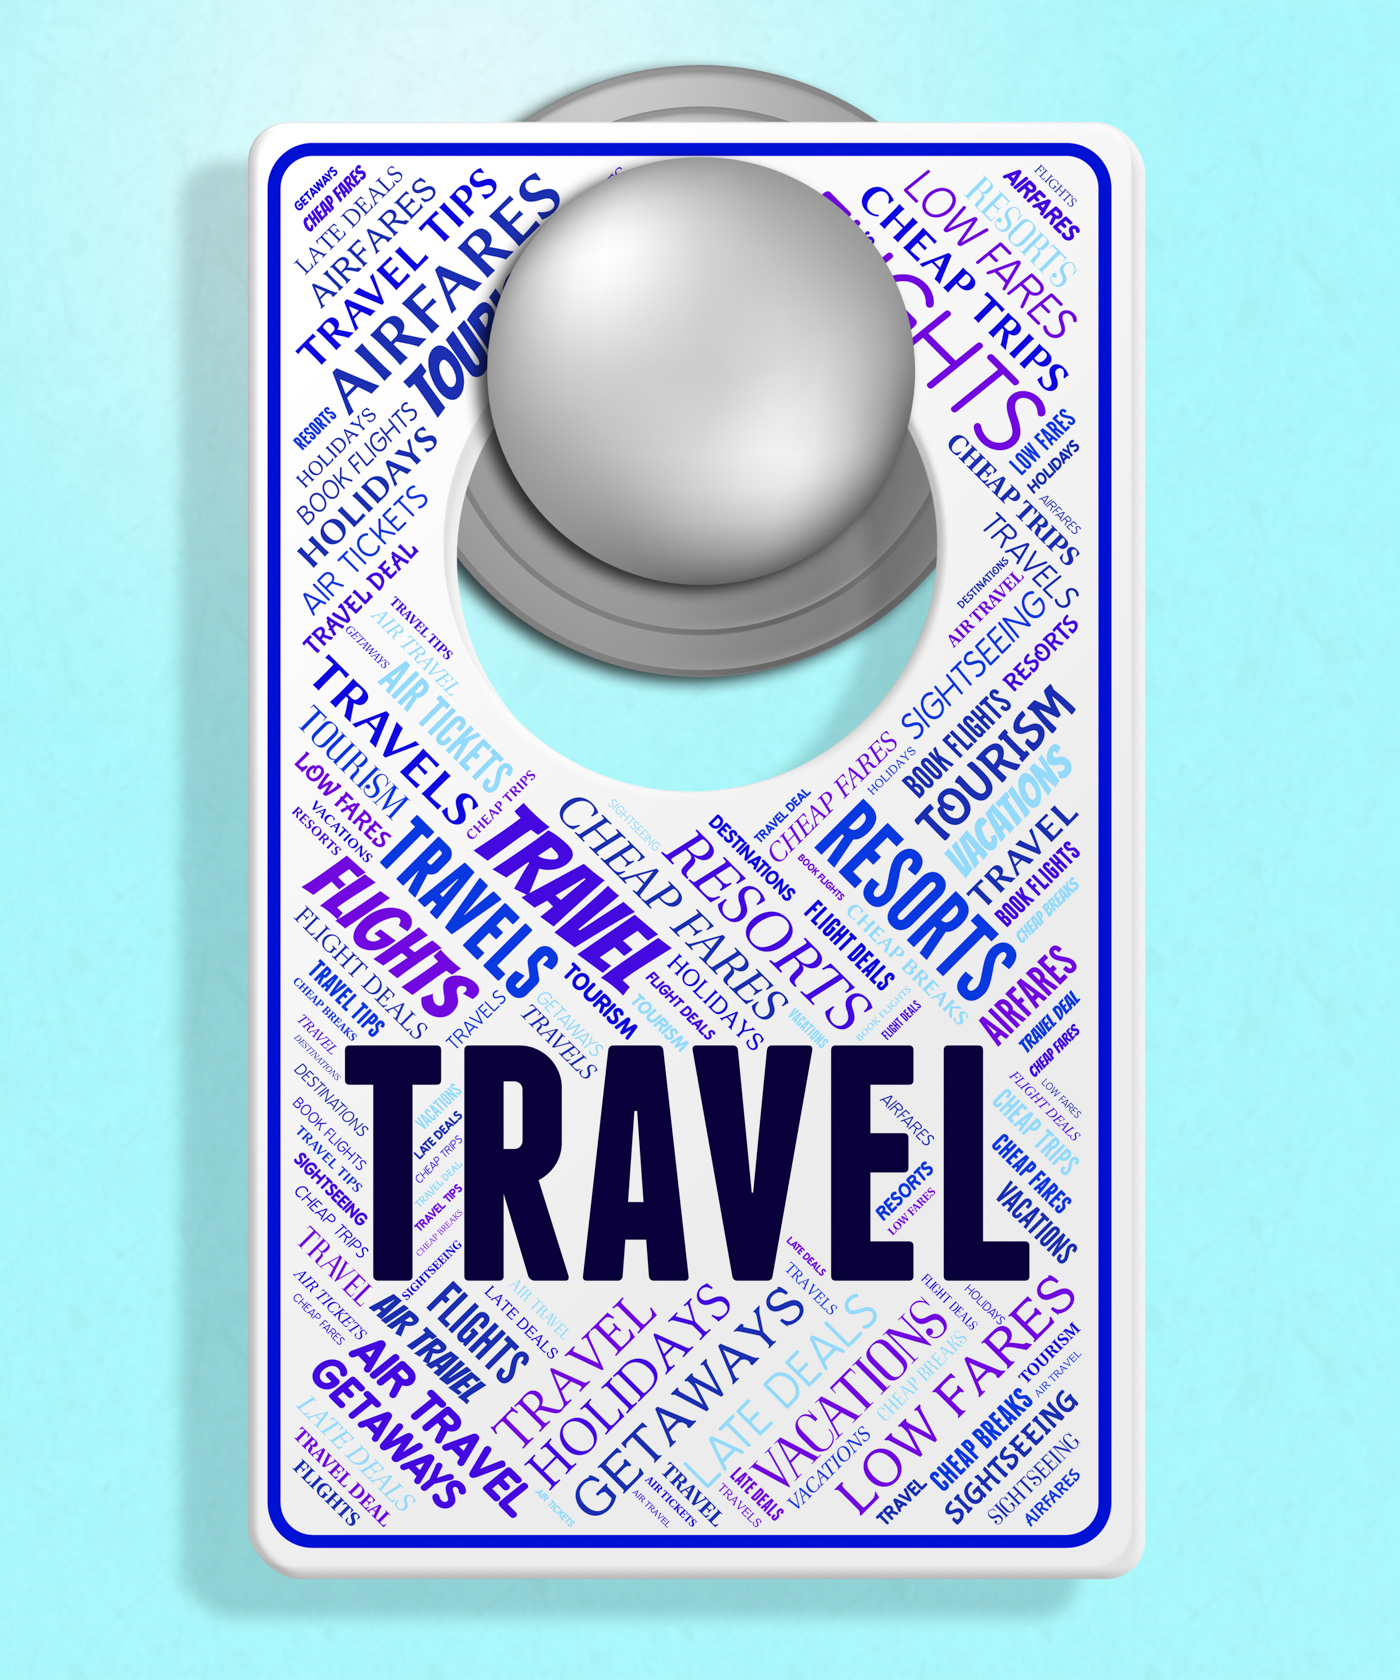 Travel sign represents message trip and traveller photo